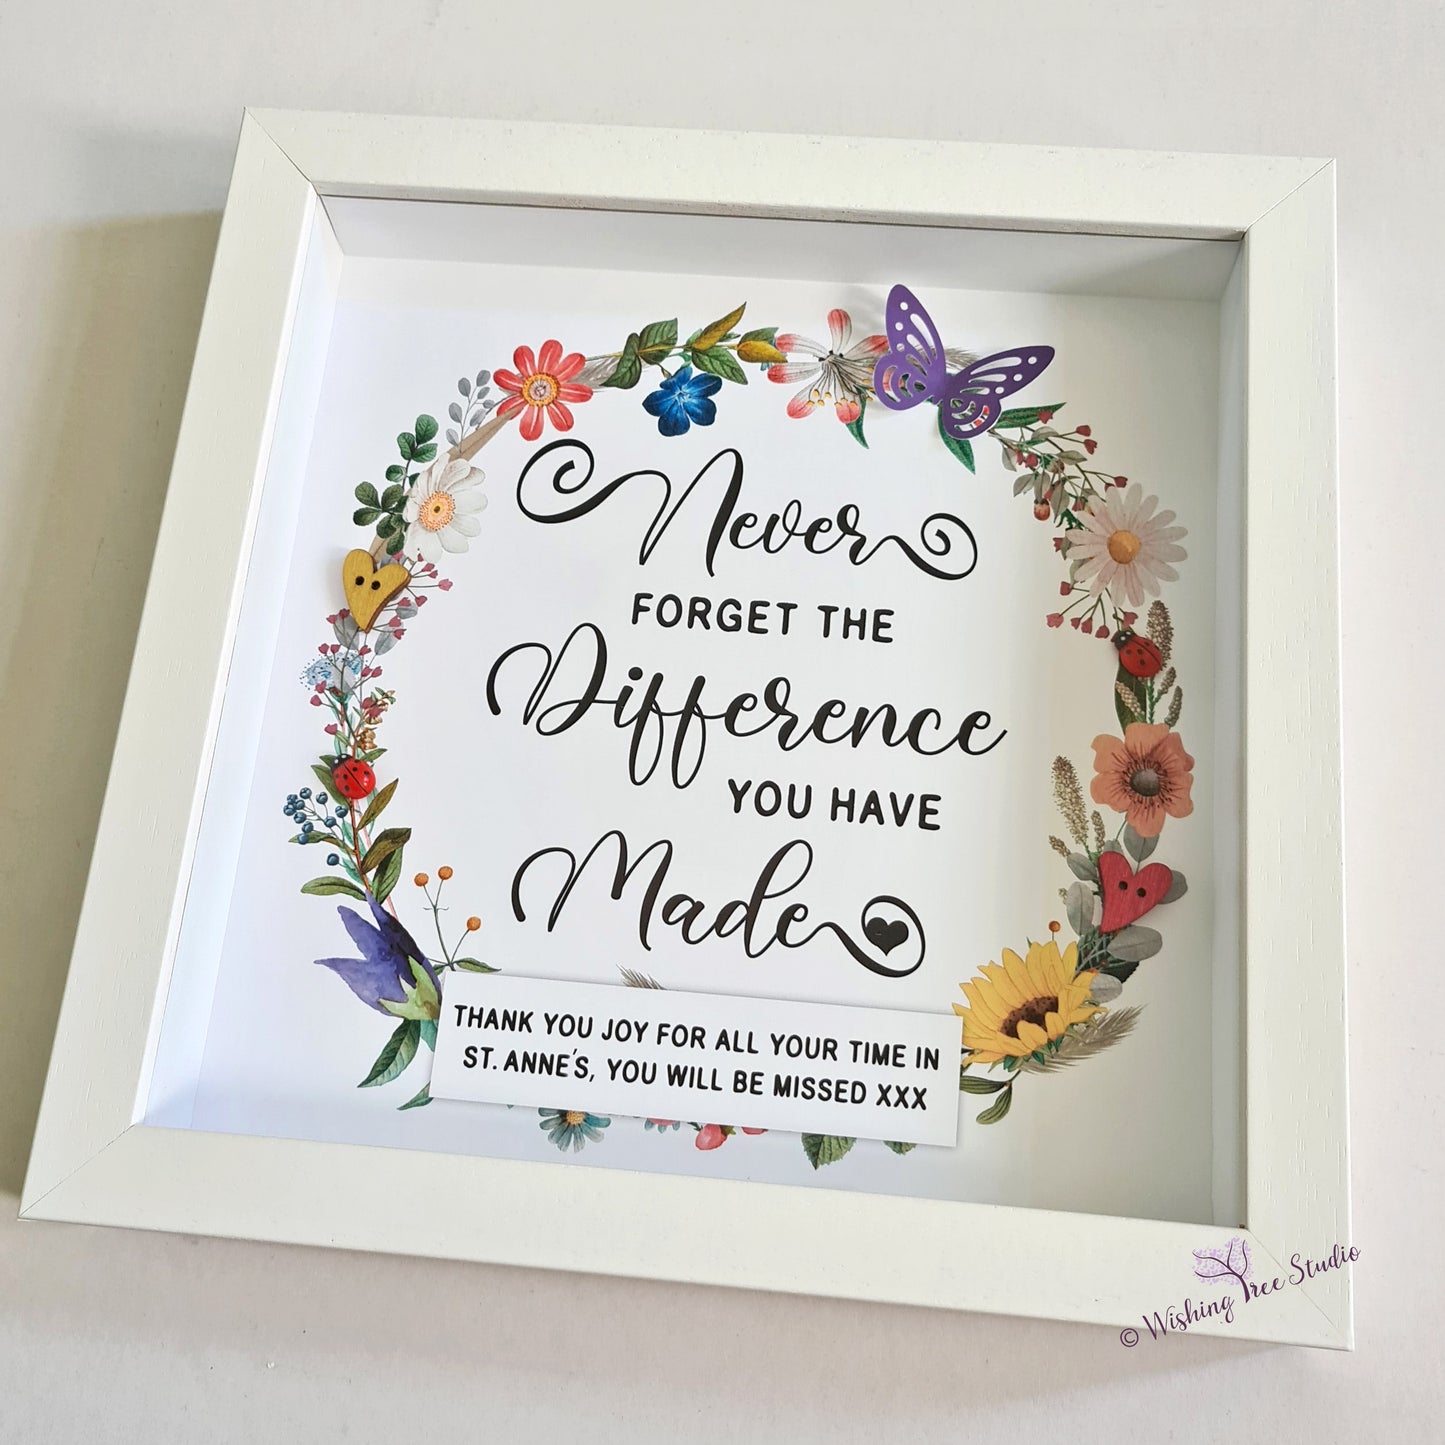 'Never forget the difference you have made' frame